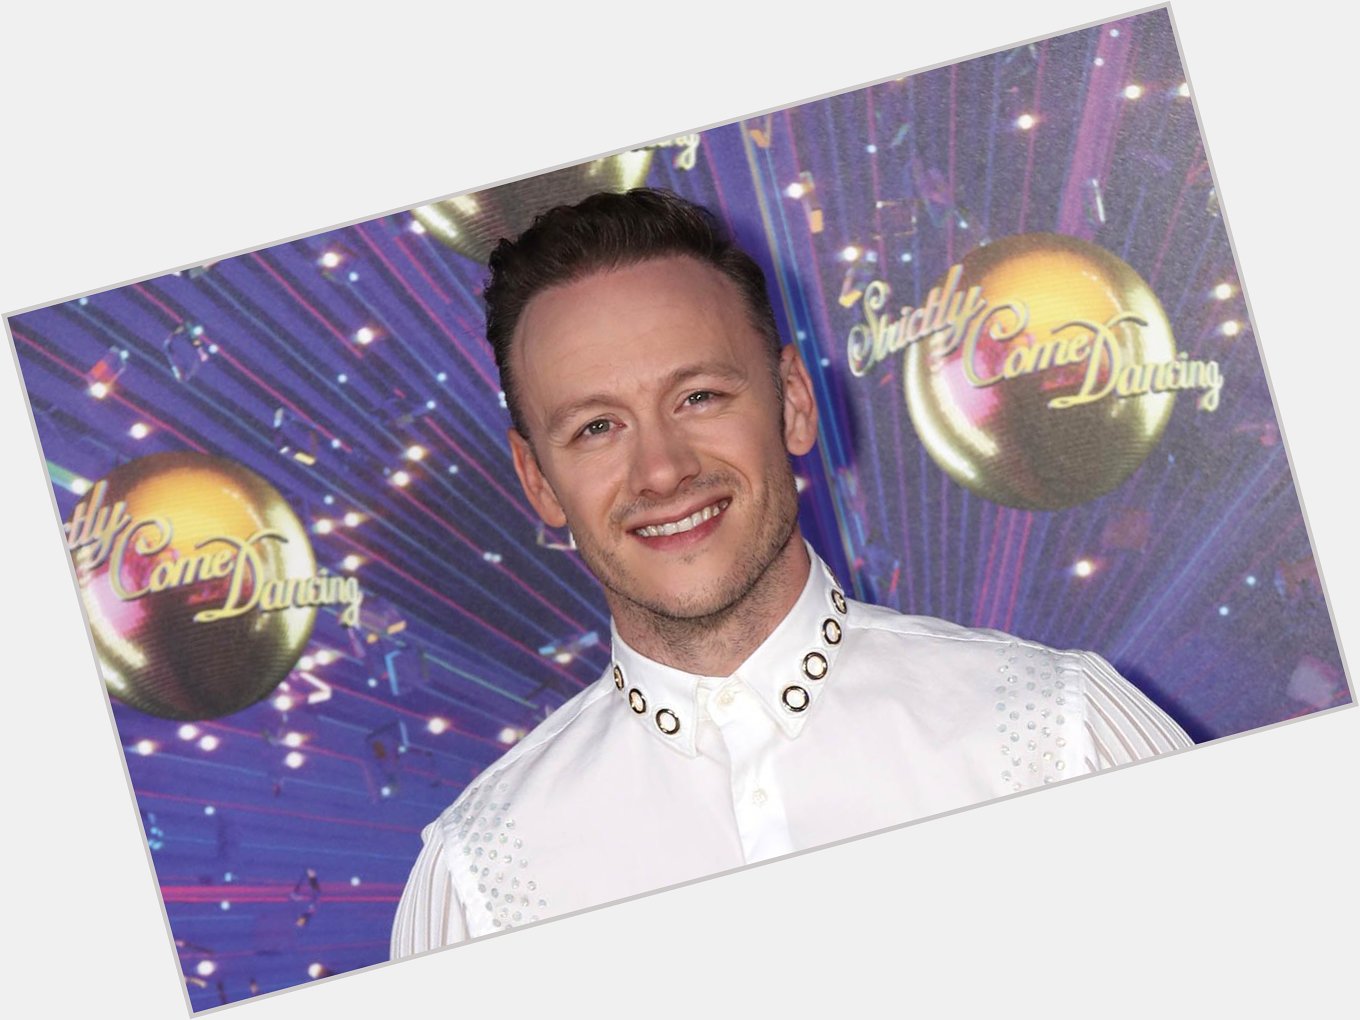 HAPPY BIRTHDAY 
KEVIN CLIFTON HAVE A GREAT DAY MATE 